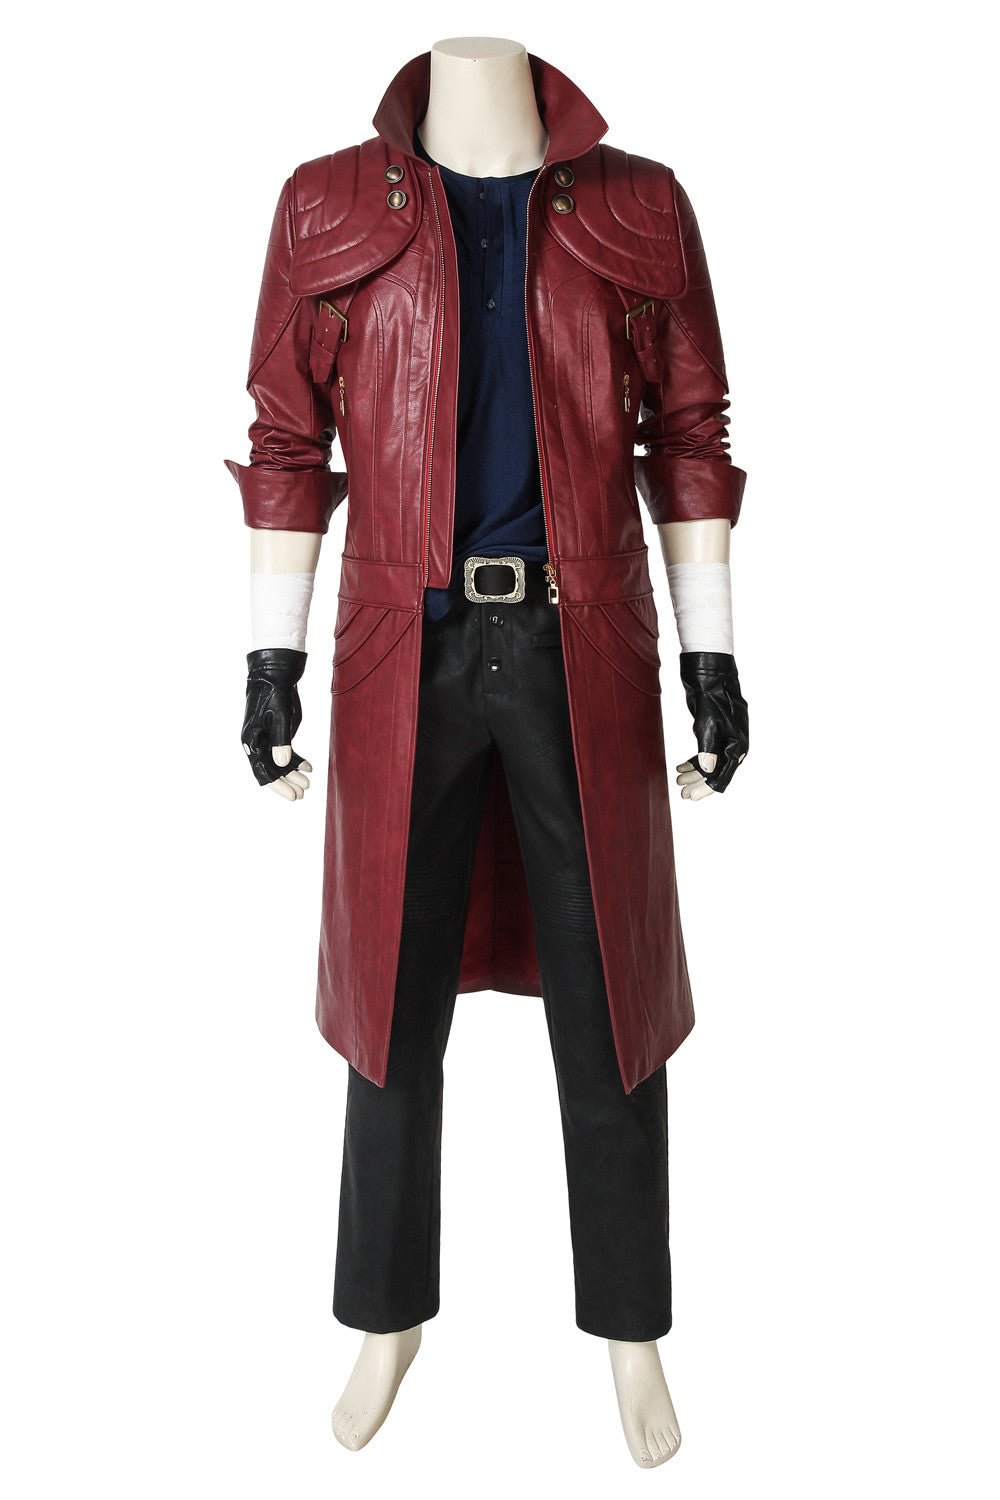 2018 Devil May Cry 5 Dante Cosplay Costume